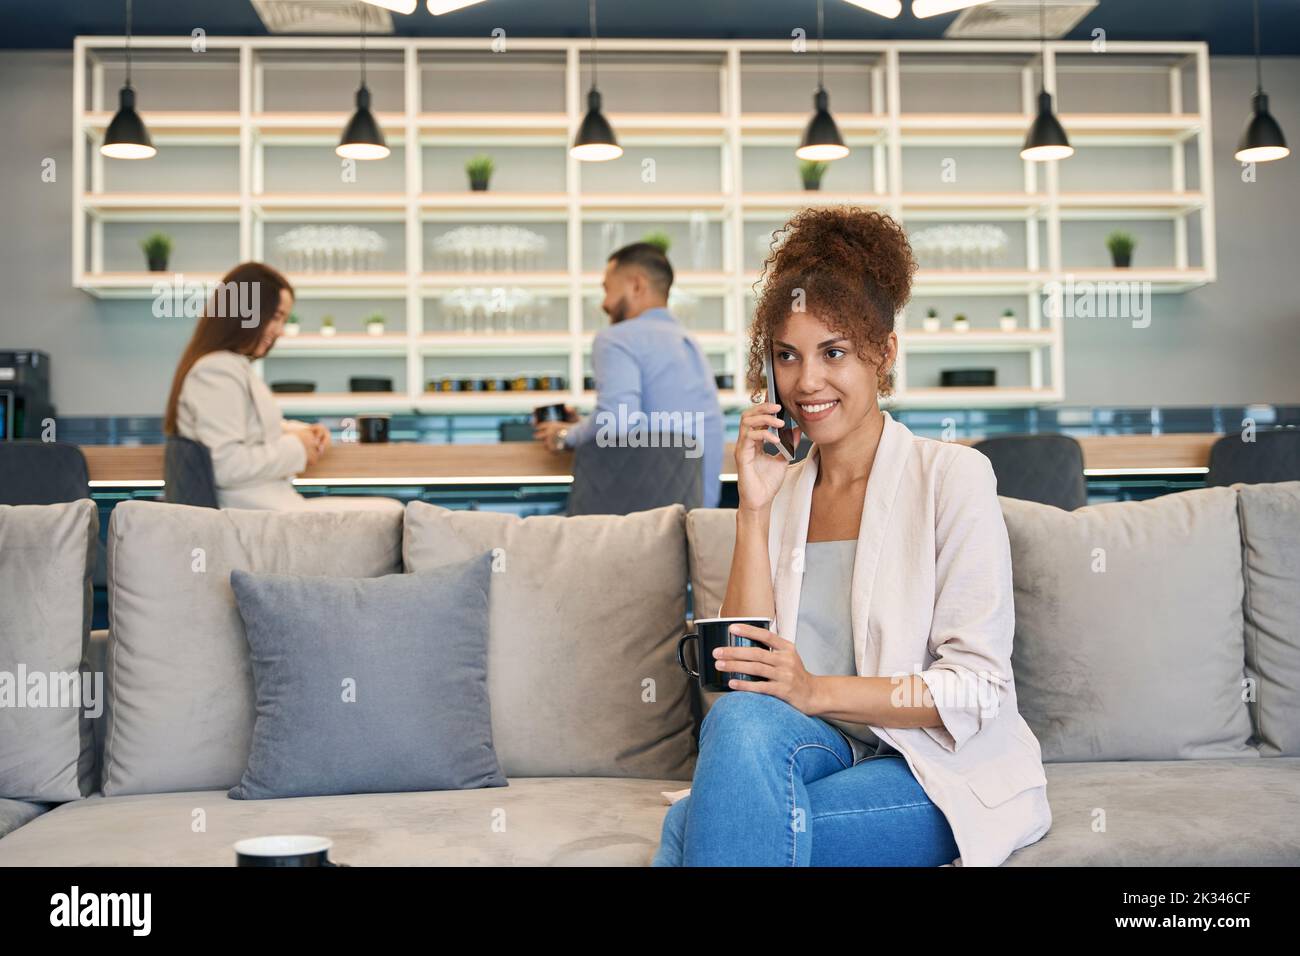 Woman holding a phone conversation at coffee break Stock Photo